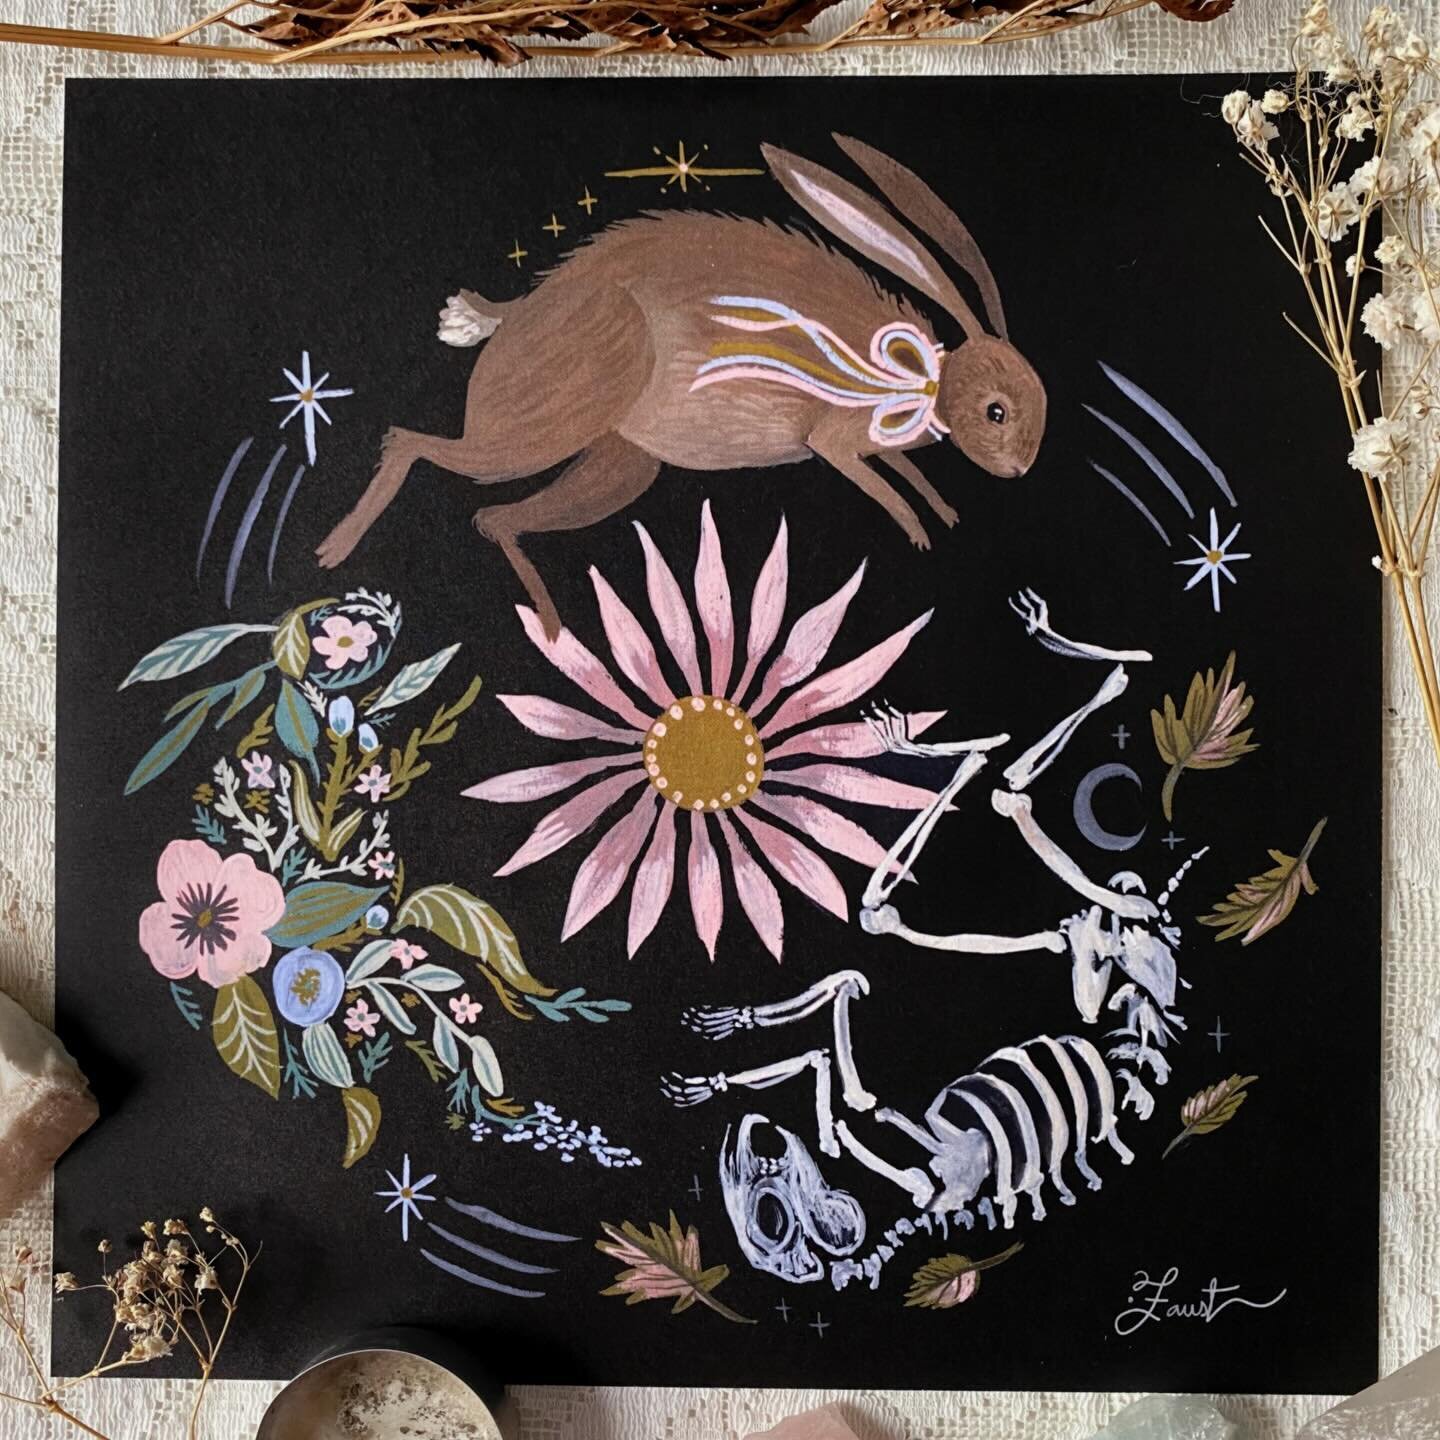 Just did a big restock of this much beloved 𝑪𝒊𝒓𝒄𝒍𝒆 𝒐𝒇 𝑳𝒊𝒇𝒆 print🐇🌷💀, right in time for spring!🌞🌿✨

What phase of this cycle are you currently in? I feel like I&rsquo;m at the tail end of the skeleton phase.. with a couple little spro